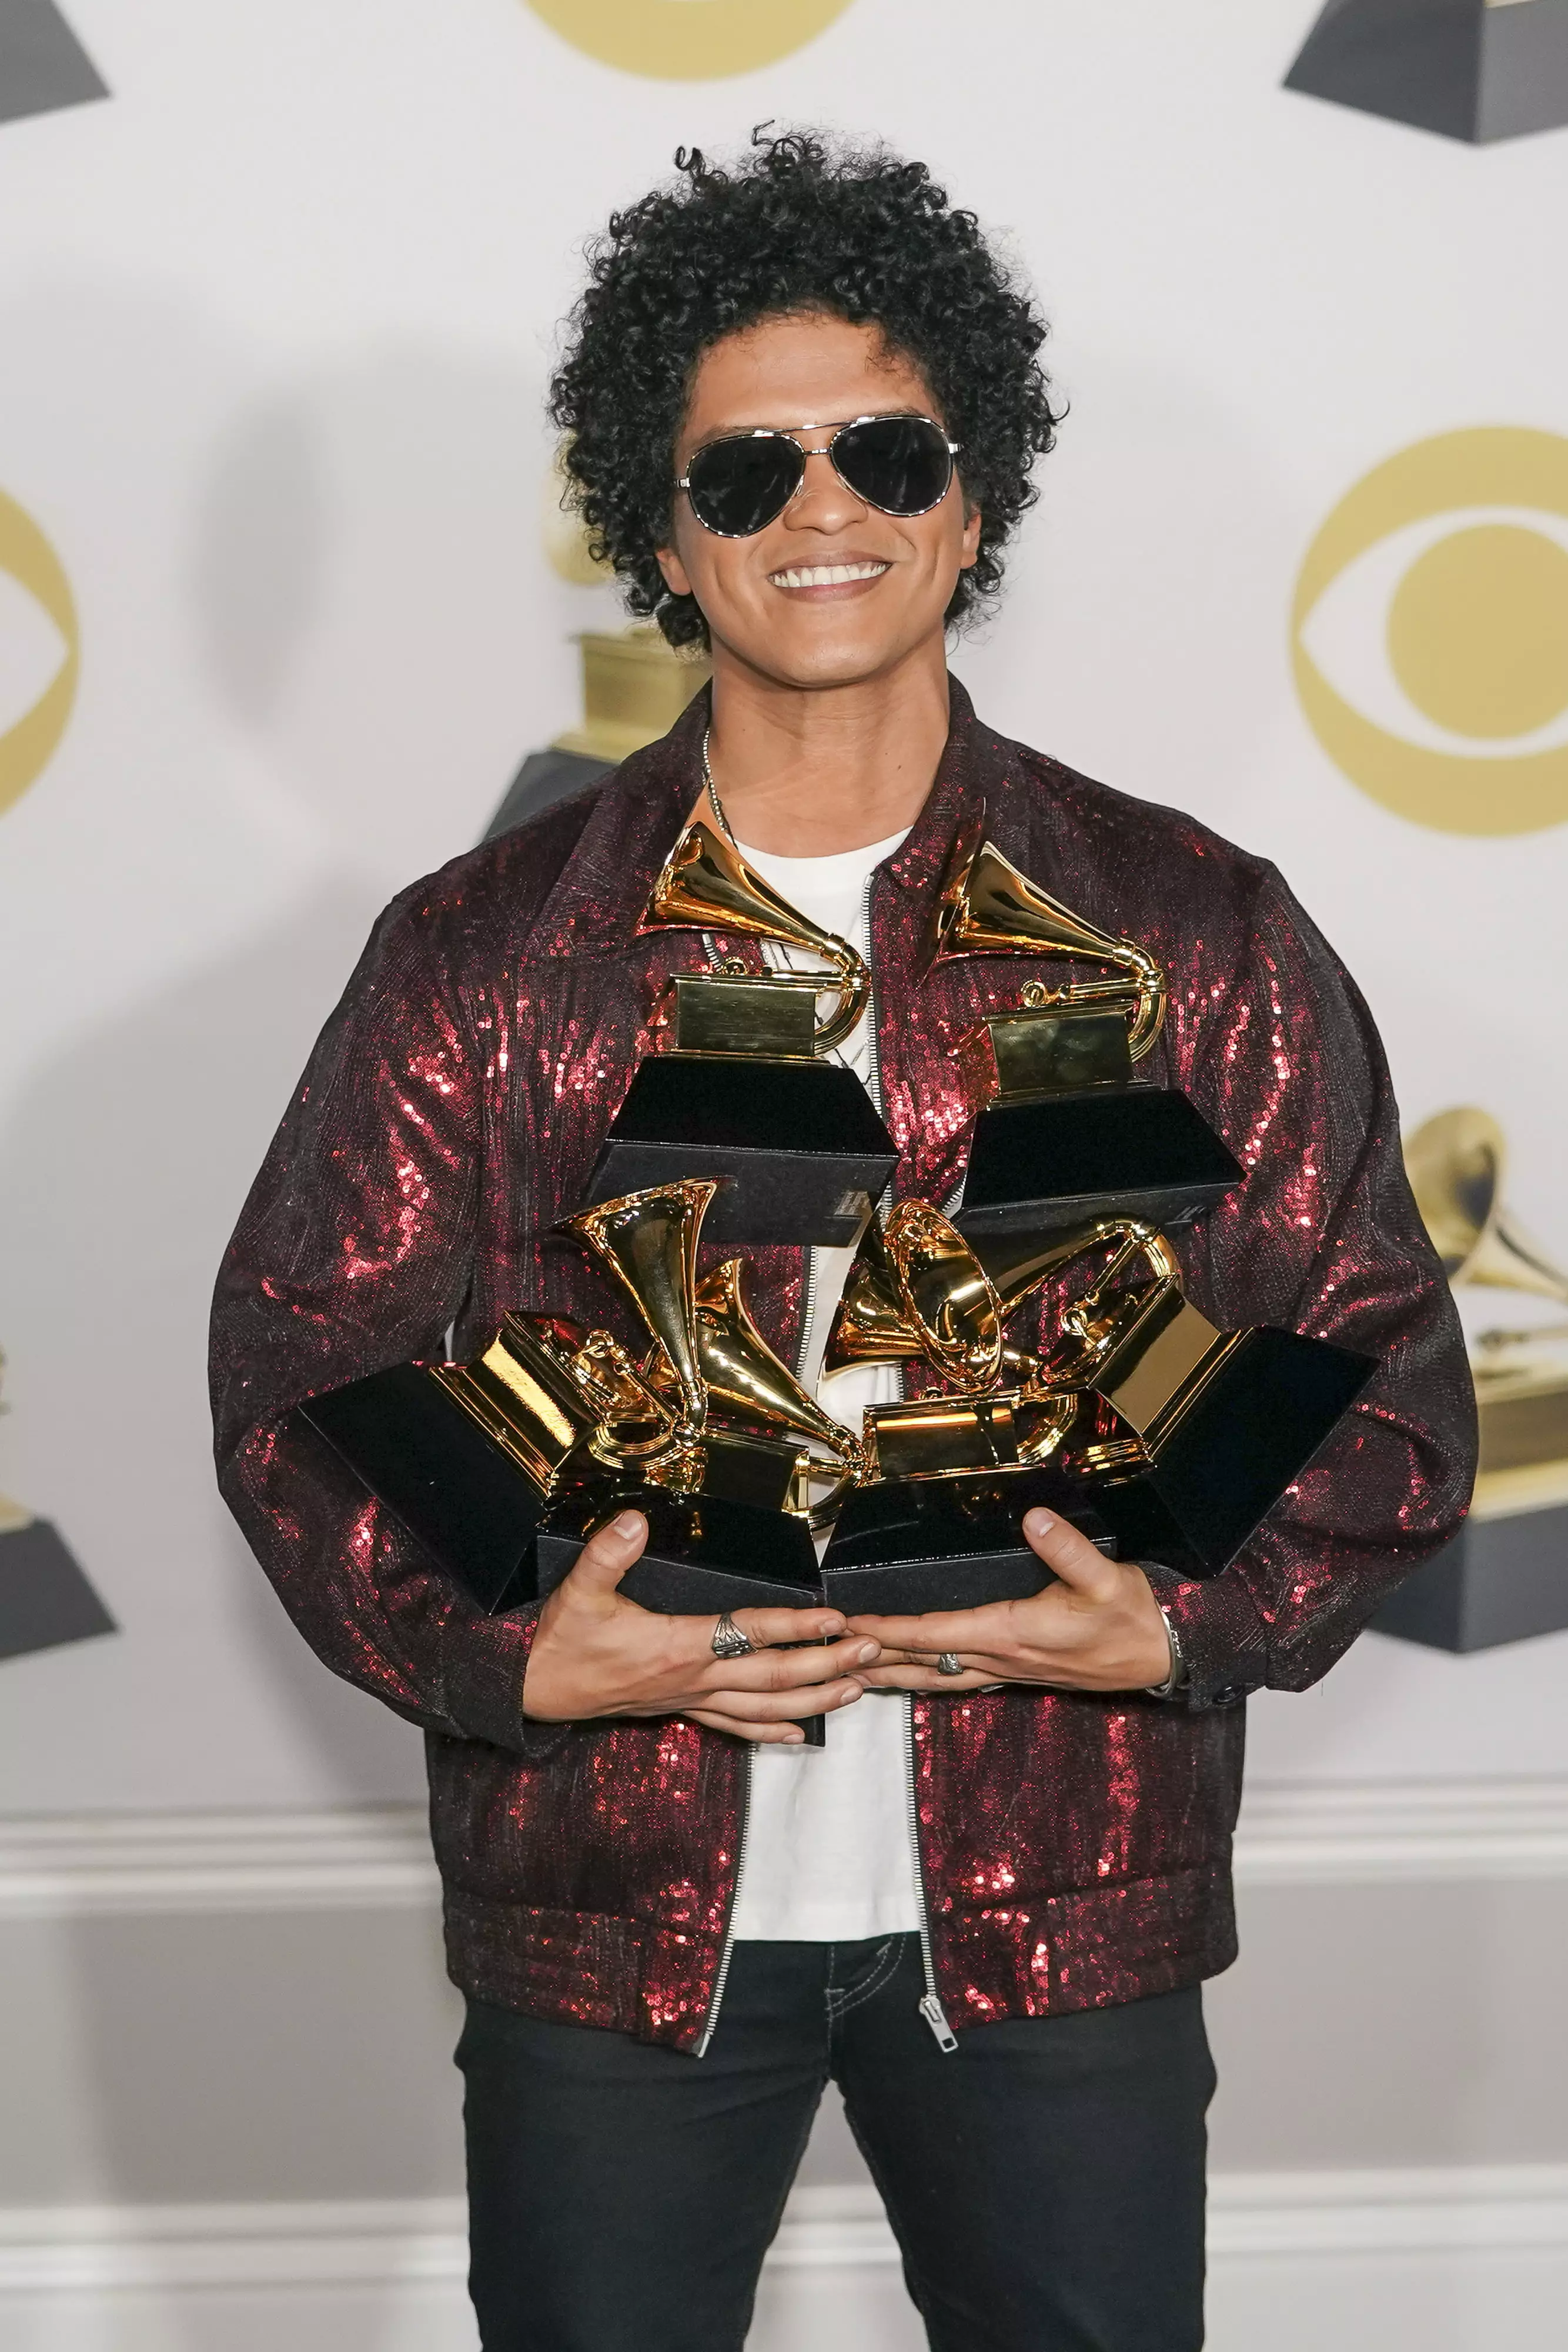 The woman claims she was scammed out of $100,000 by someone pretending to be Bruno Mars.